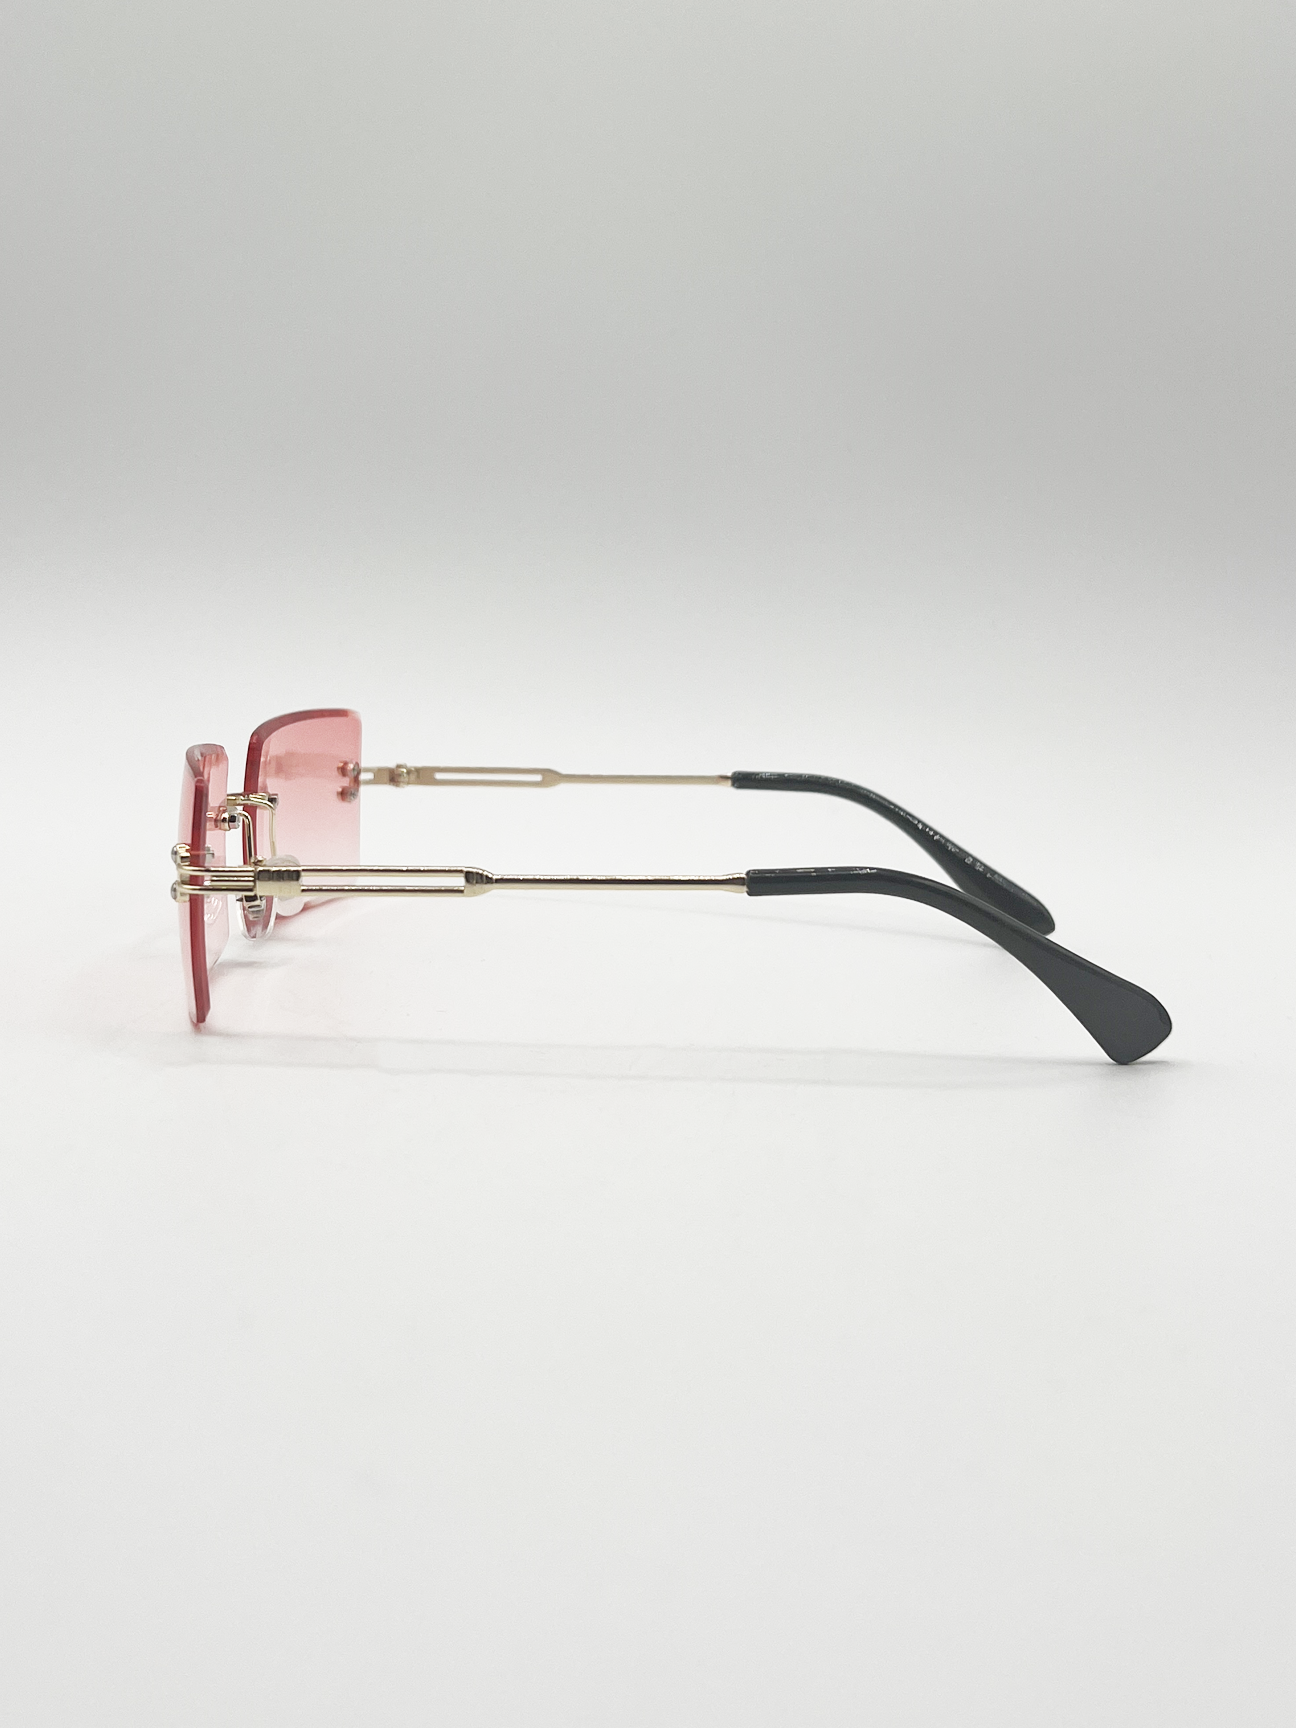 Frameless Square Sunglasses in Pink